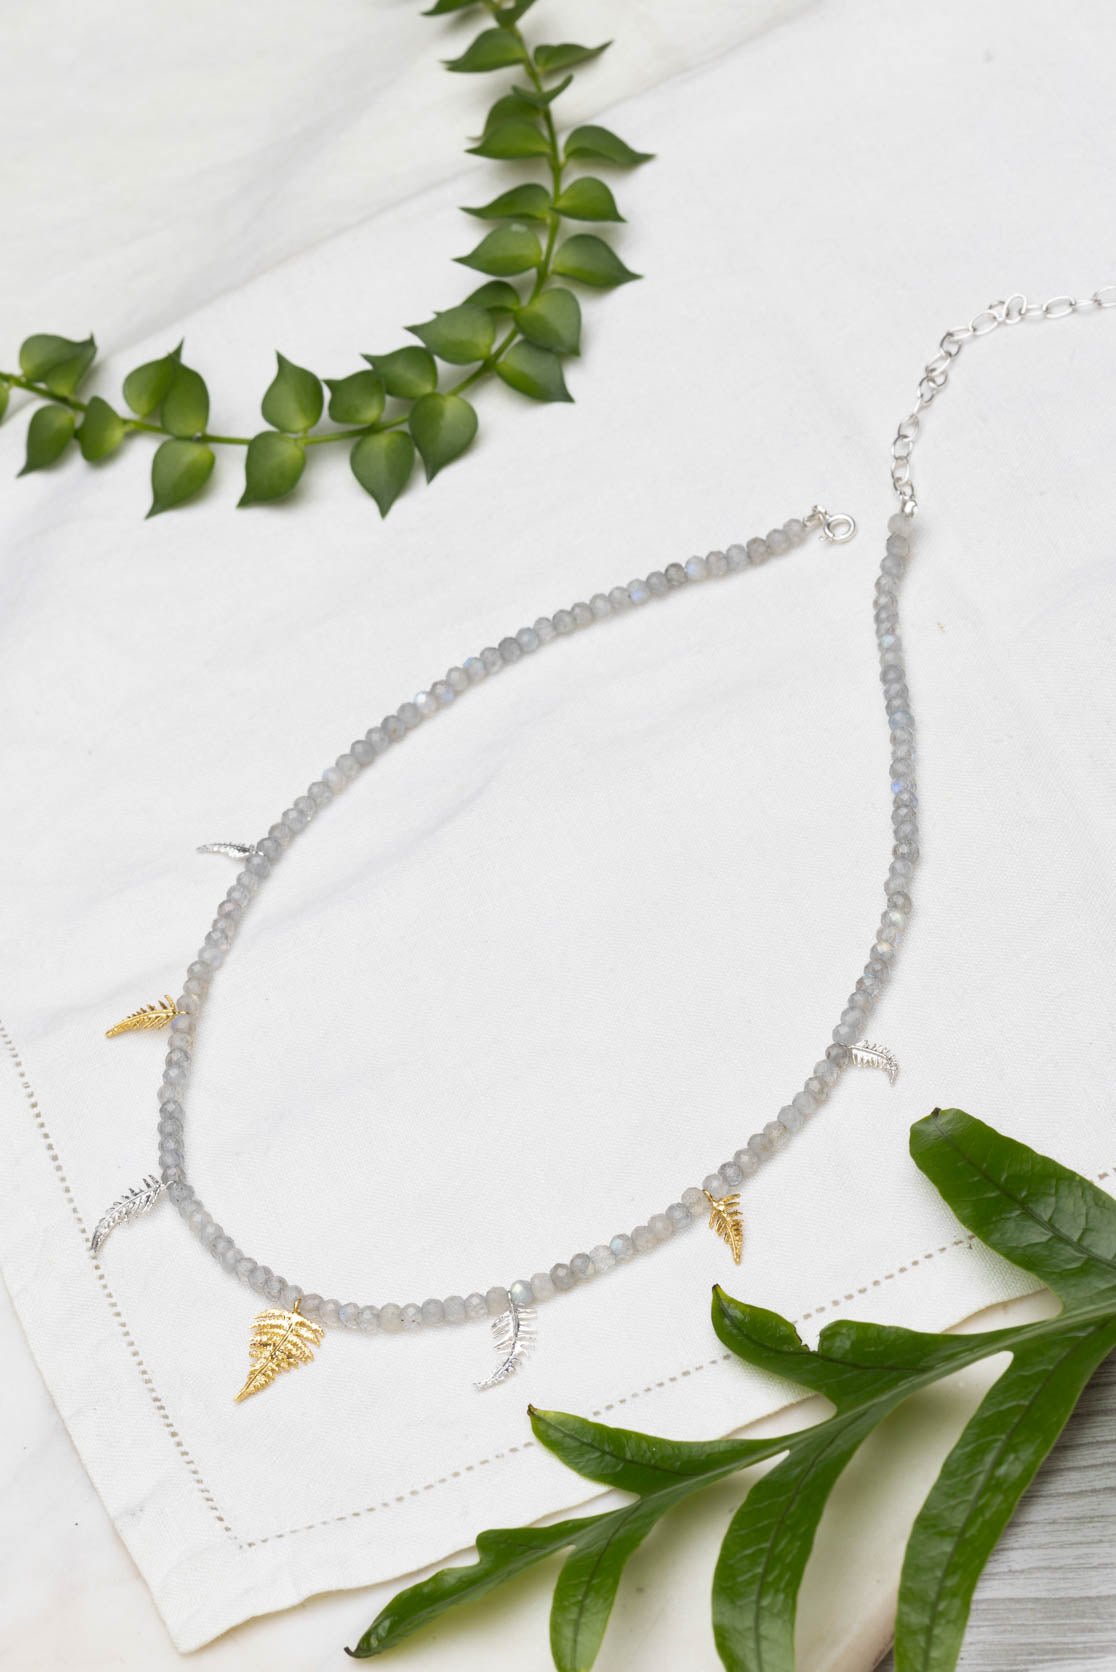 Fern Necklace In Sterling Silver And Gold Vermeil With Labradorite Beads